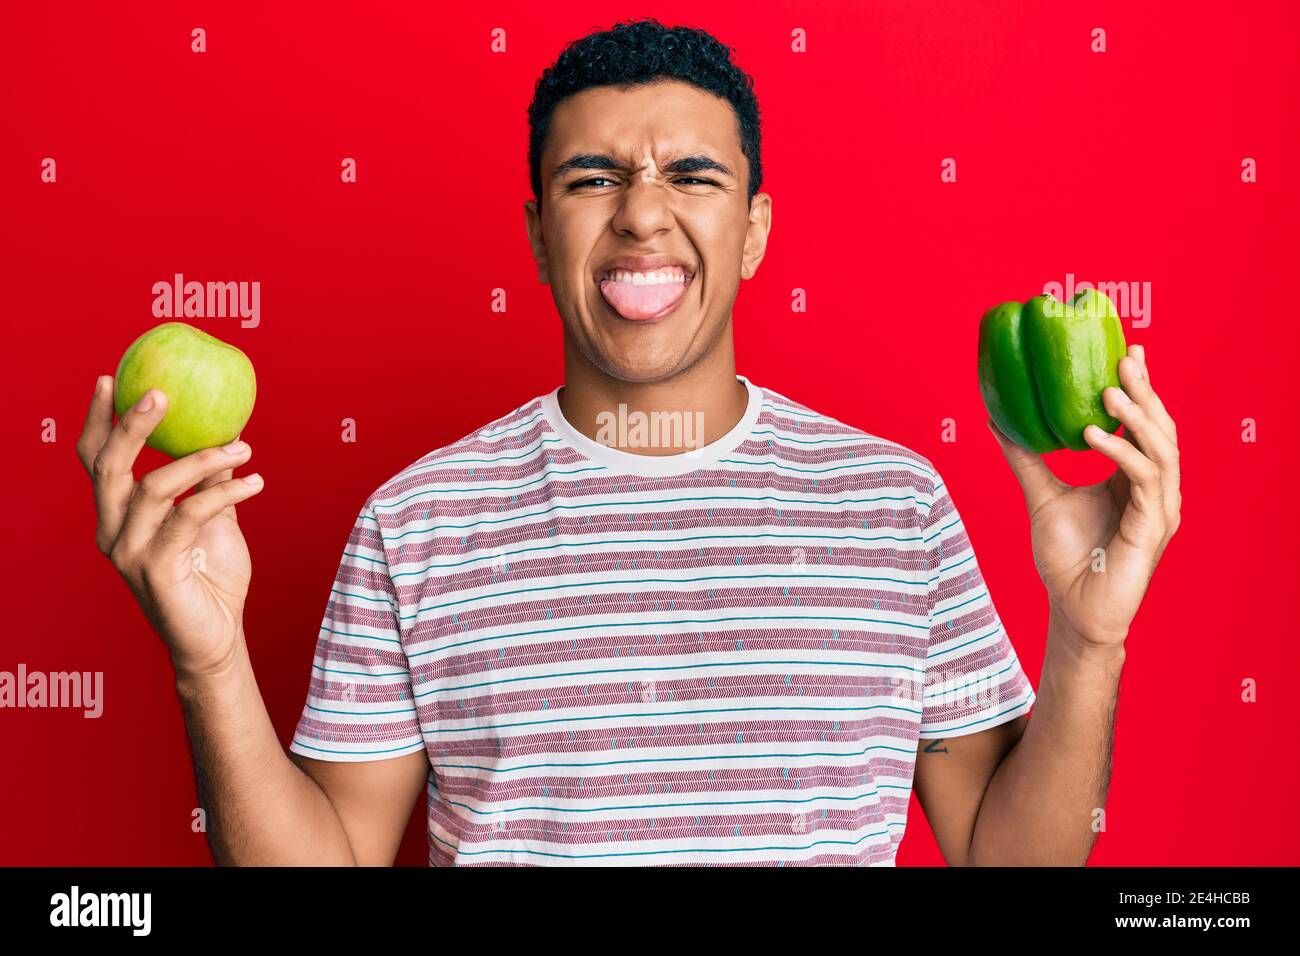 Young arab man holding green apple and pepper sticking tongue out happy with funny expression. Stock Photo